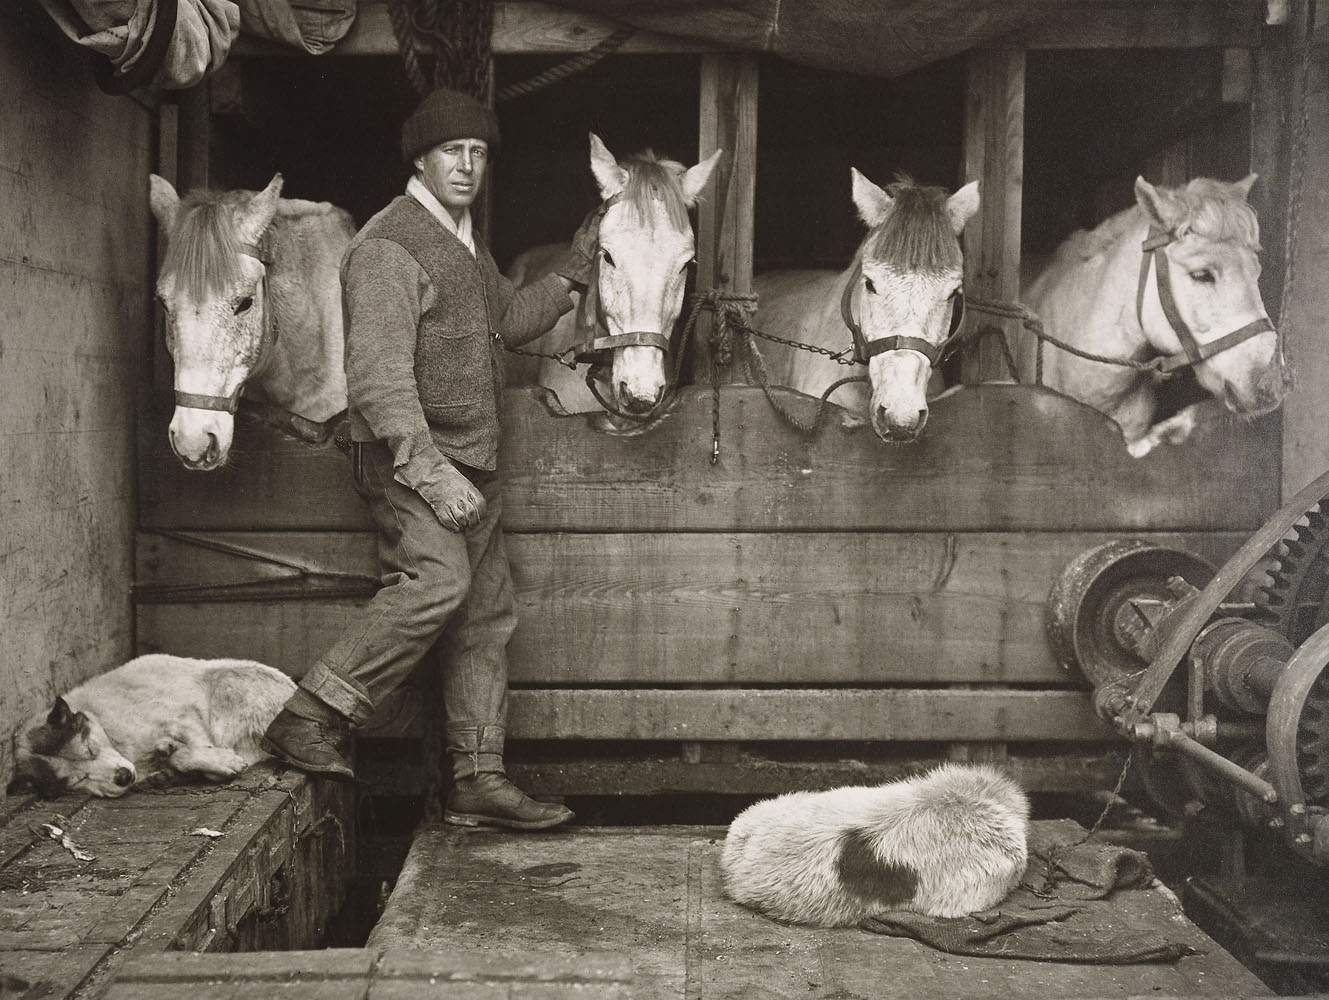 Captain Lawrence Oates and Siberian ponies on board Terra Nova.The ponies hauled the supplies during the early stages of the expedition, but they were ill suited for the extreme Antarctic conditions in 1910.